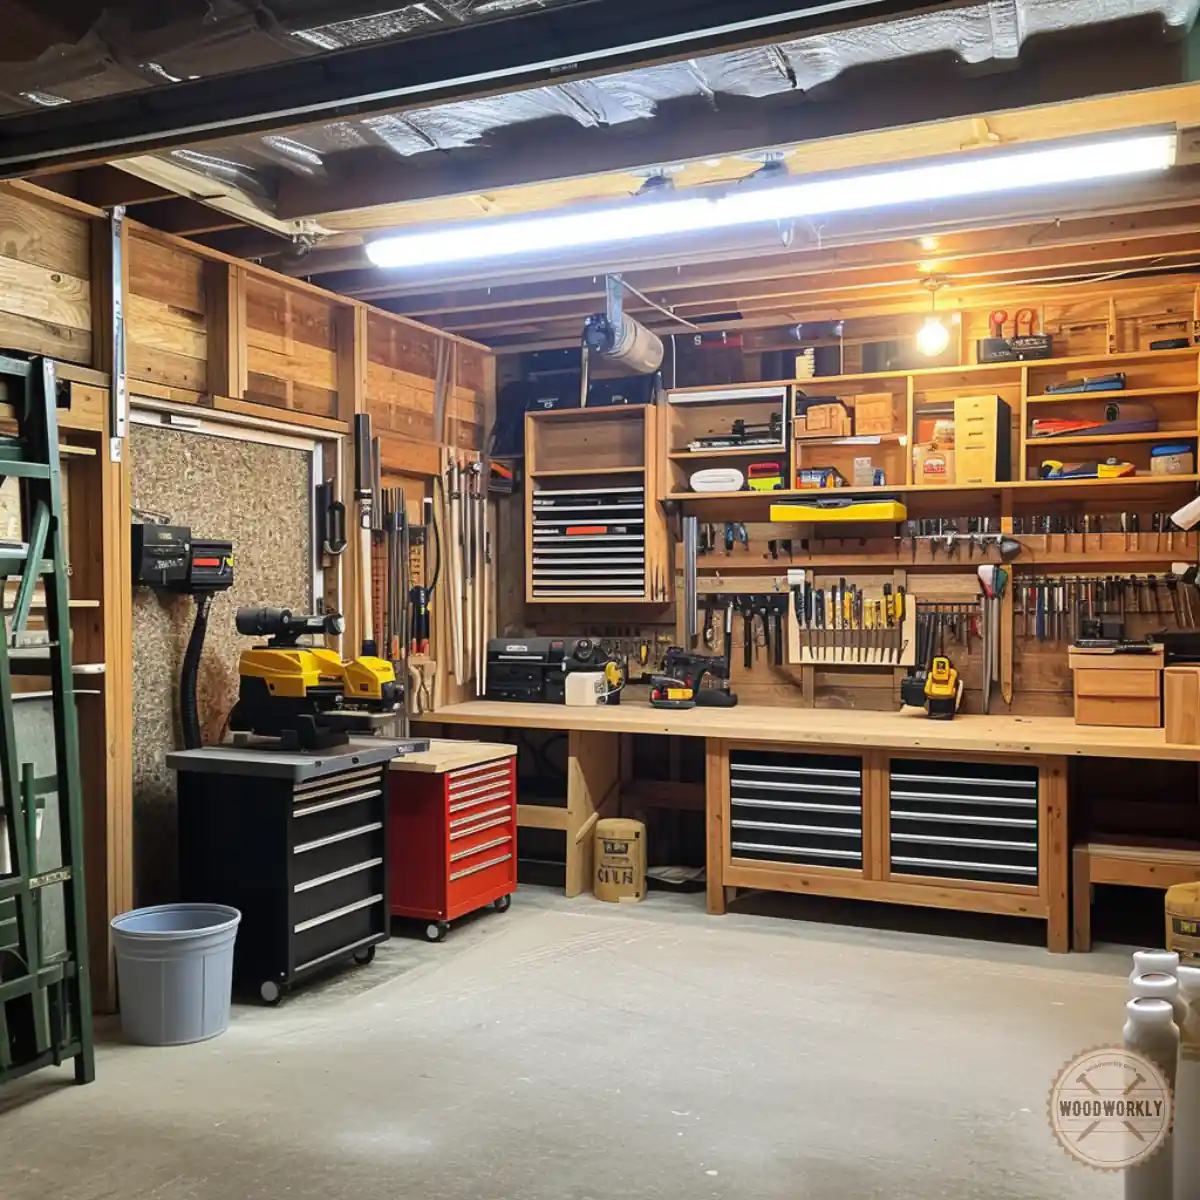 Garage turned into a woodworking space 5